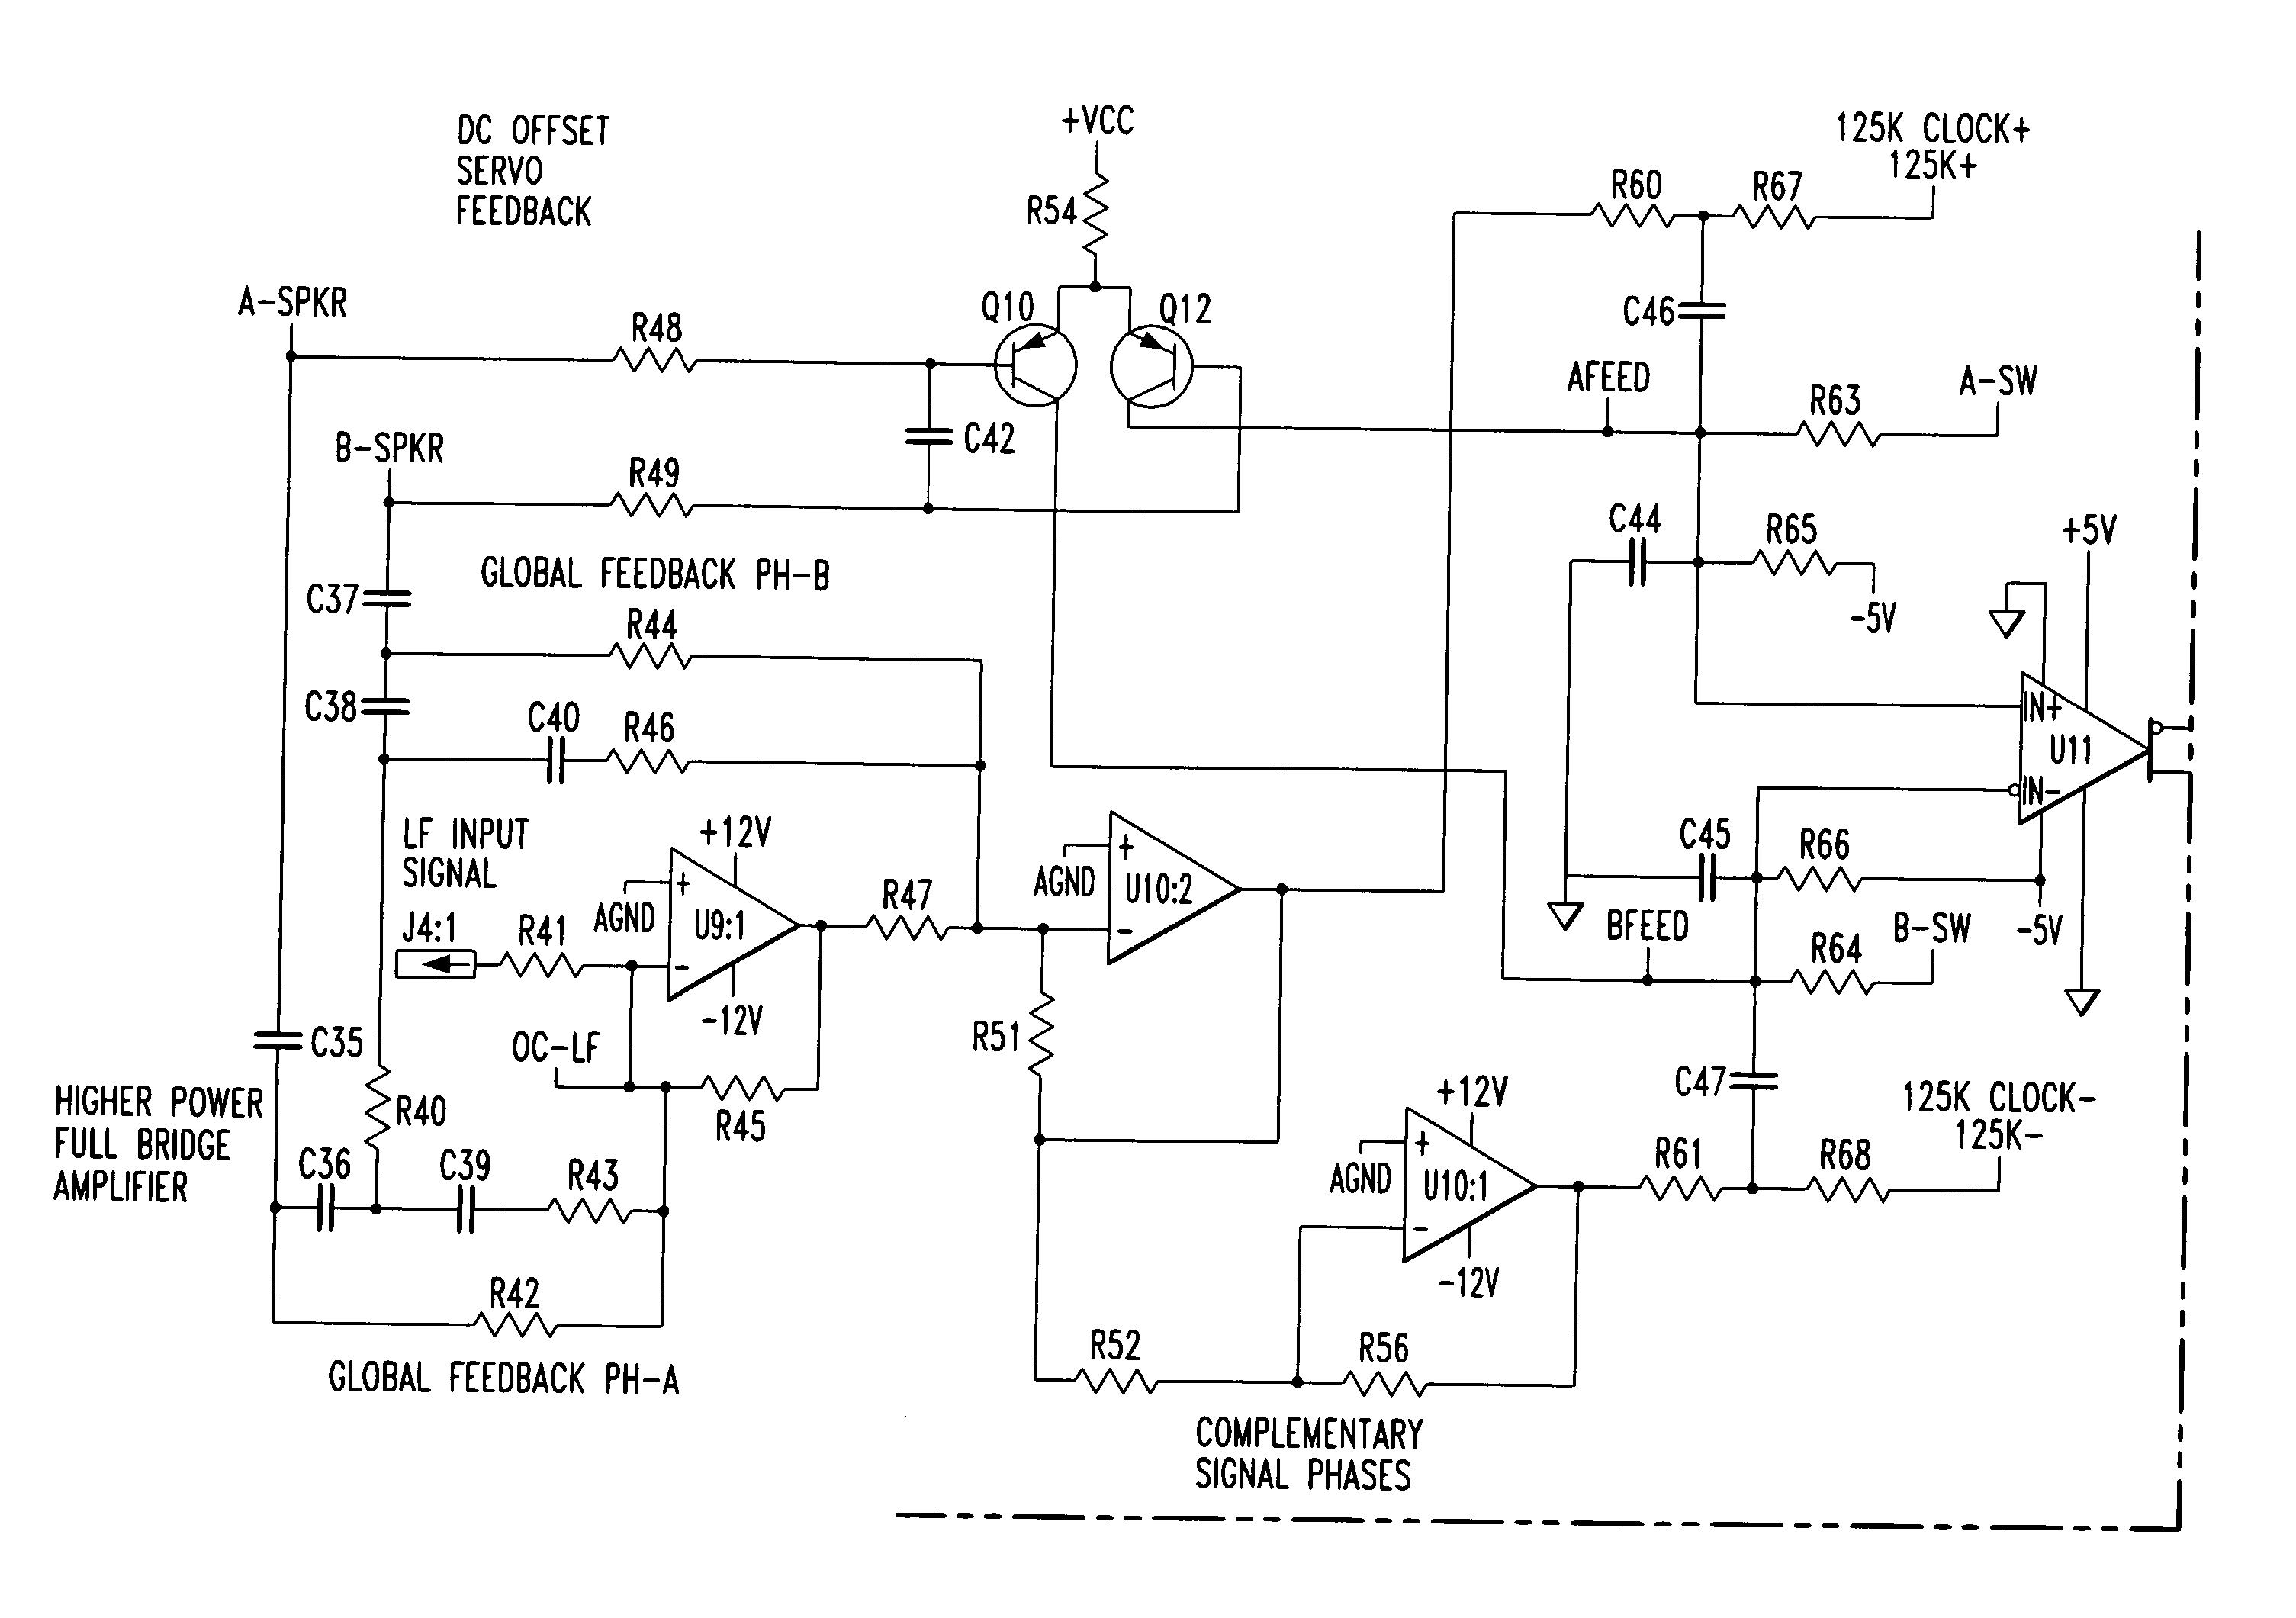 Multi-channel, multi-power class D amplifier with regulated power supply